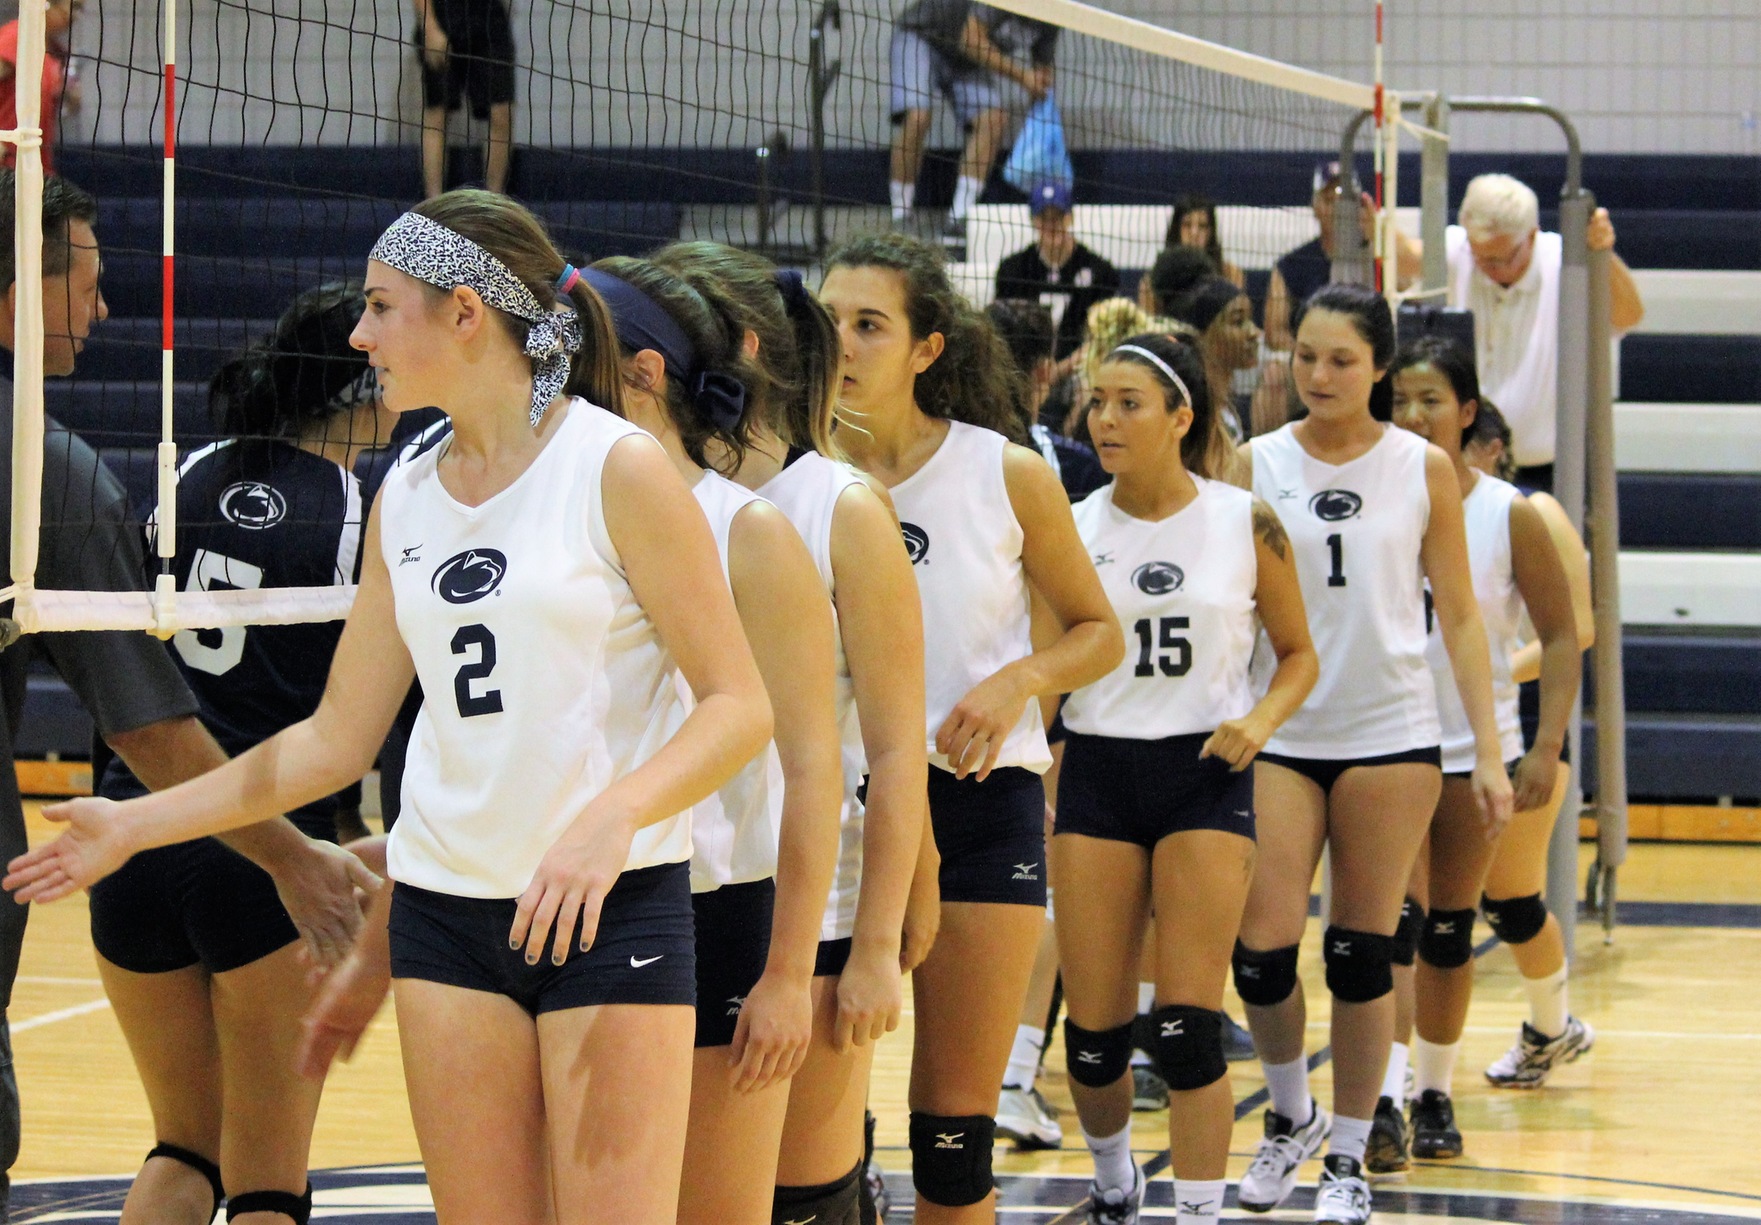 Women's Volleyball Drops Two at PSUAC Quad Match